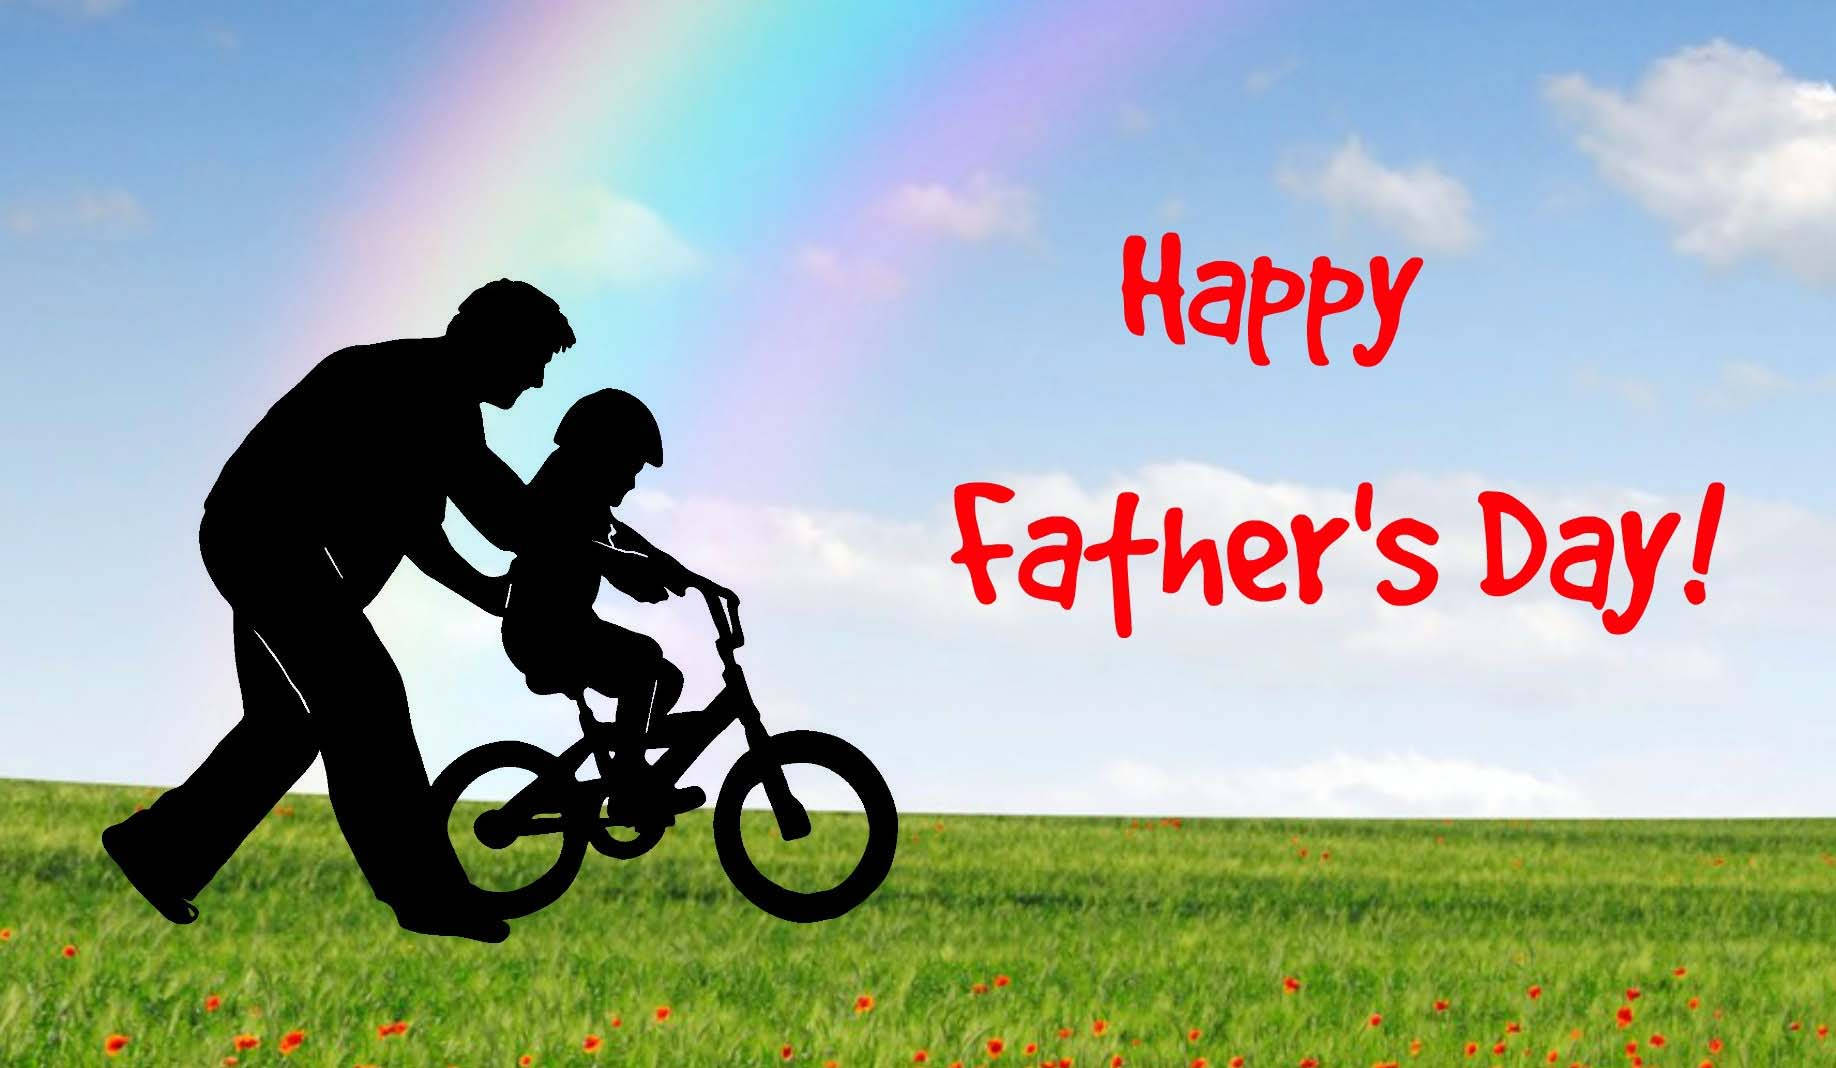 Bike Ride On Father's Day Wallpaper